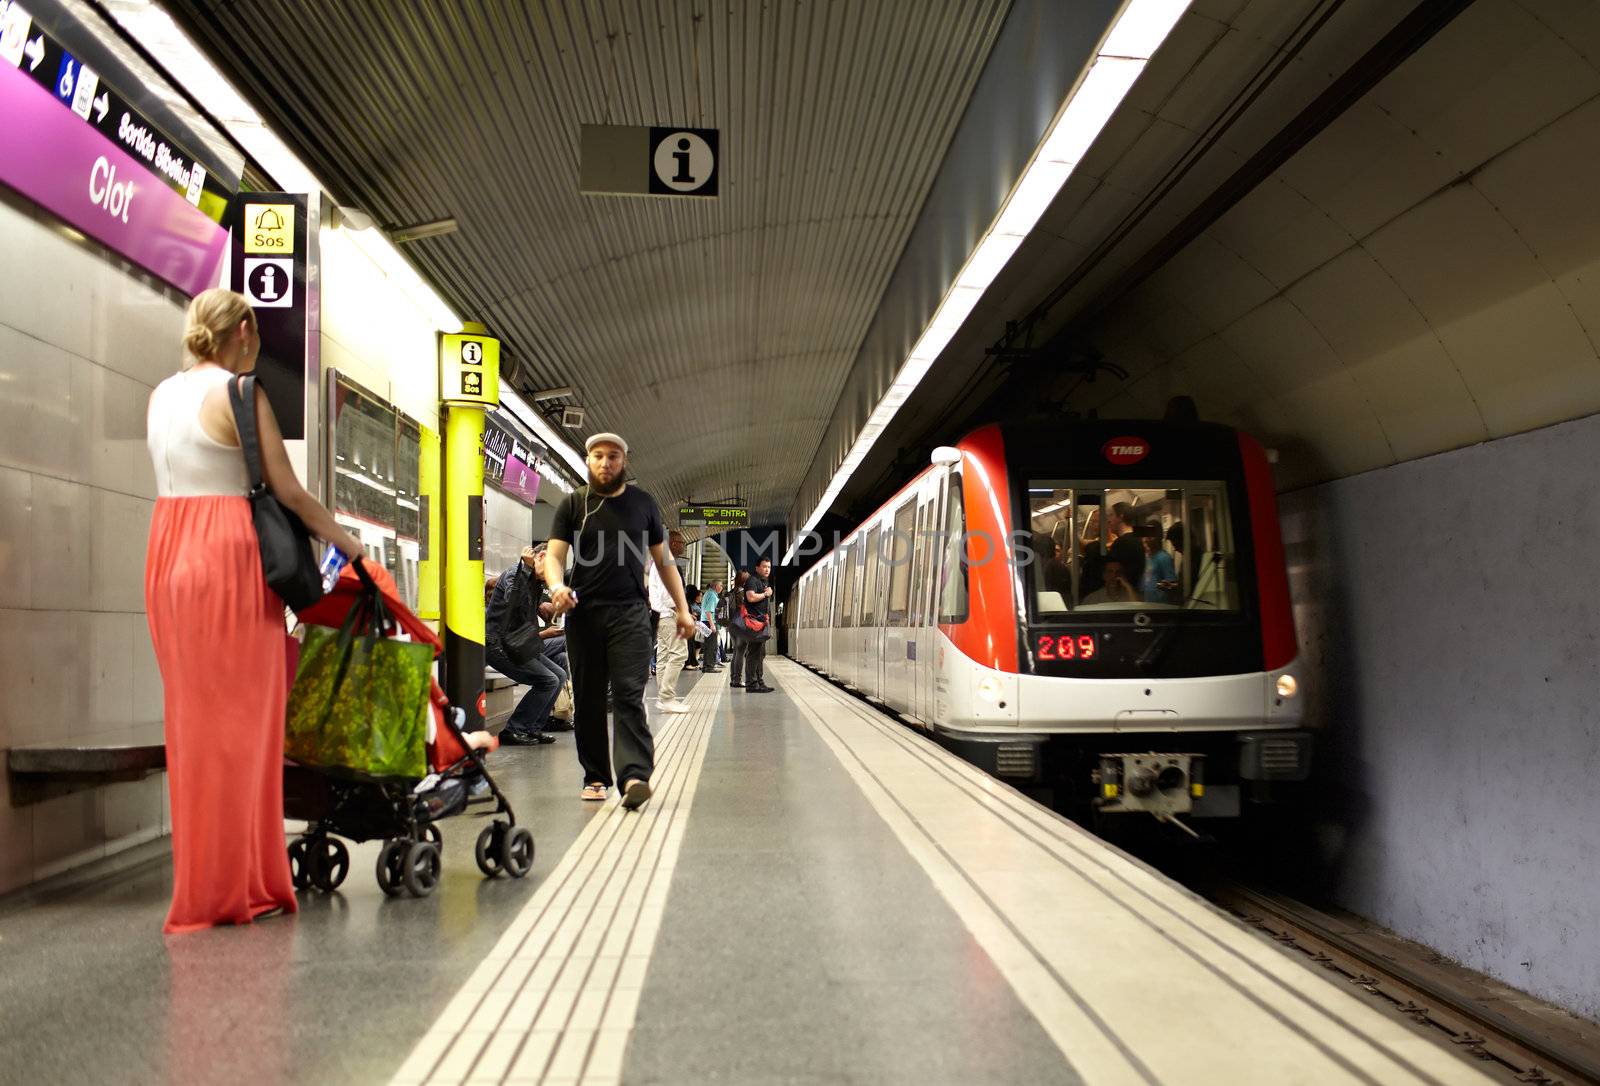 BARCELONA - MAY 25: The underground station 'Clot'. Passengers wait for the train on May 25, 2012 in Barcelona, Spain.